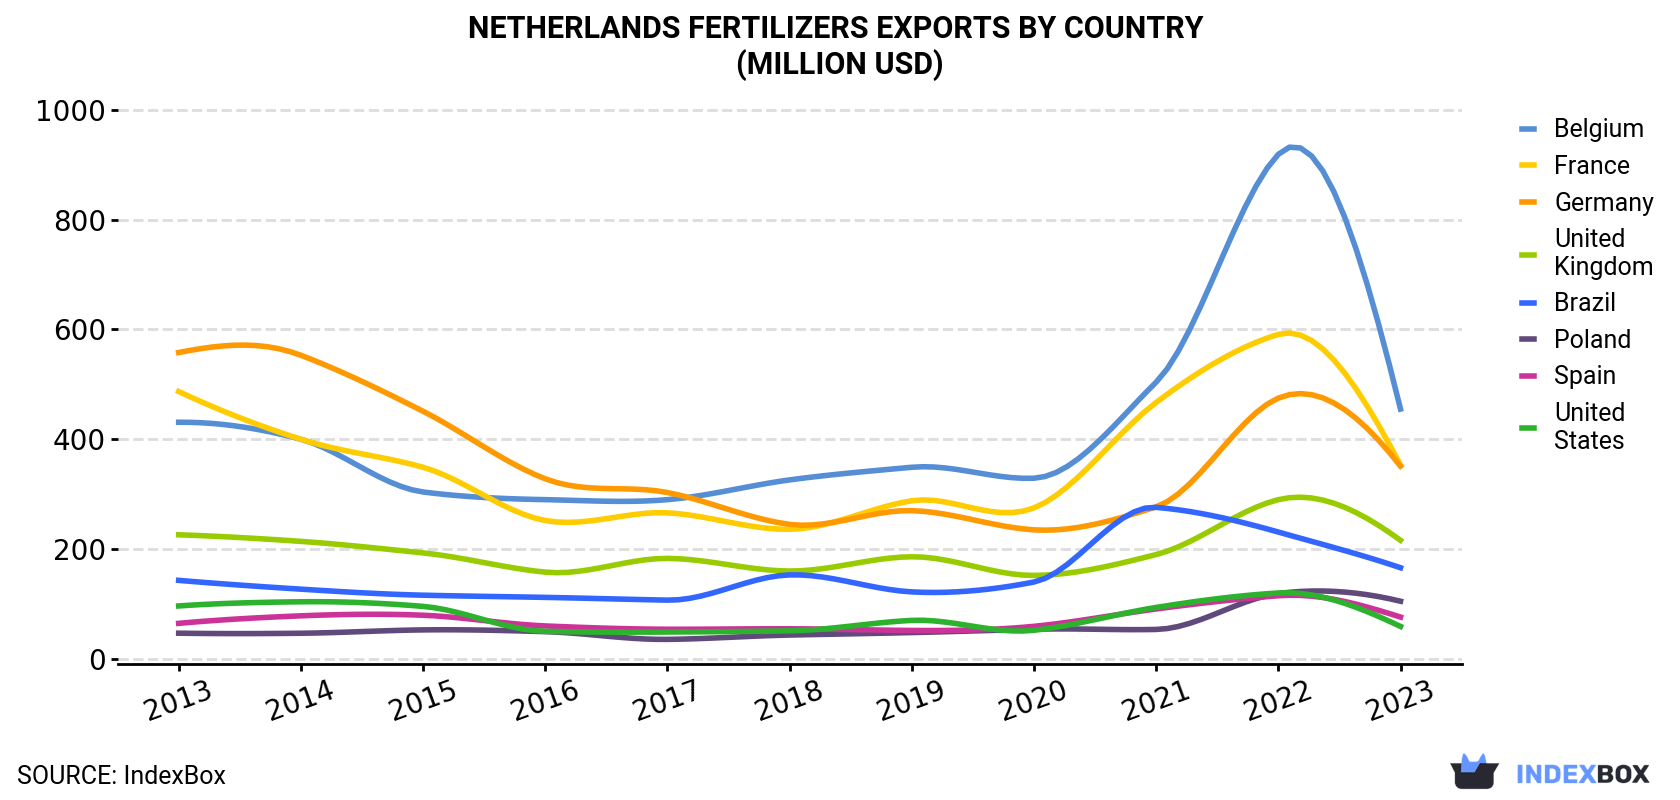 Netherlands Fertilizers Exports By Country (Million USD)